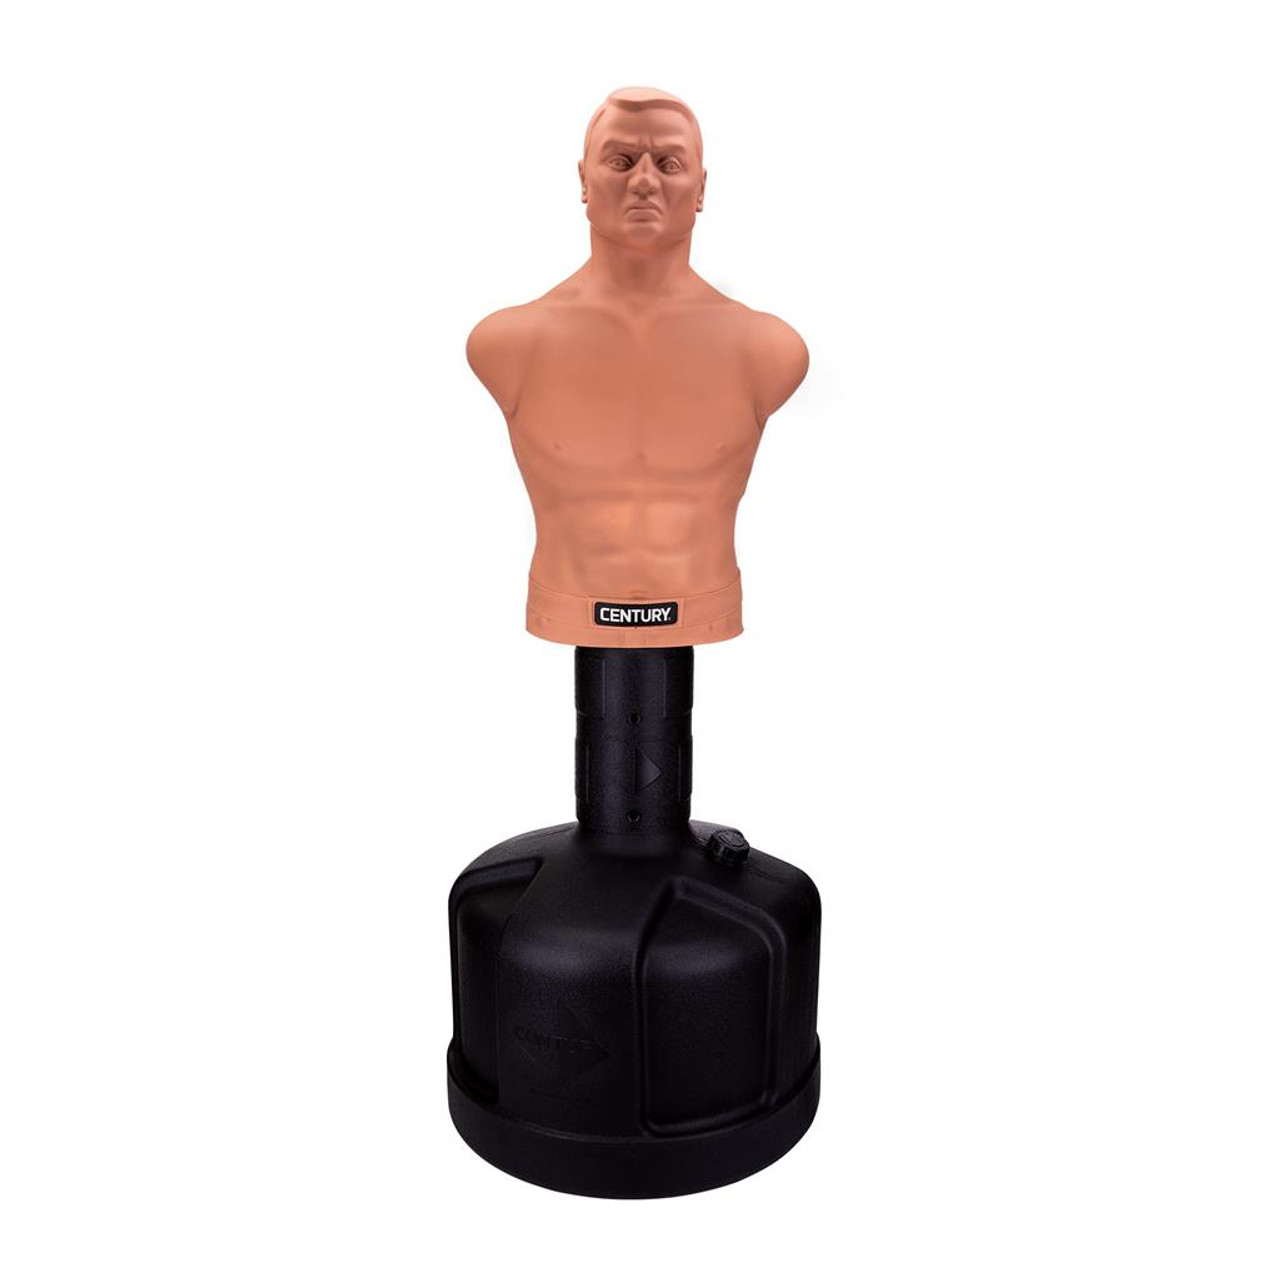 Abody Men Abdominal and Groin Protector Guard for Boxing Training